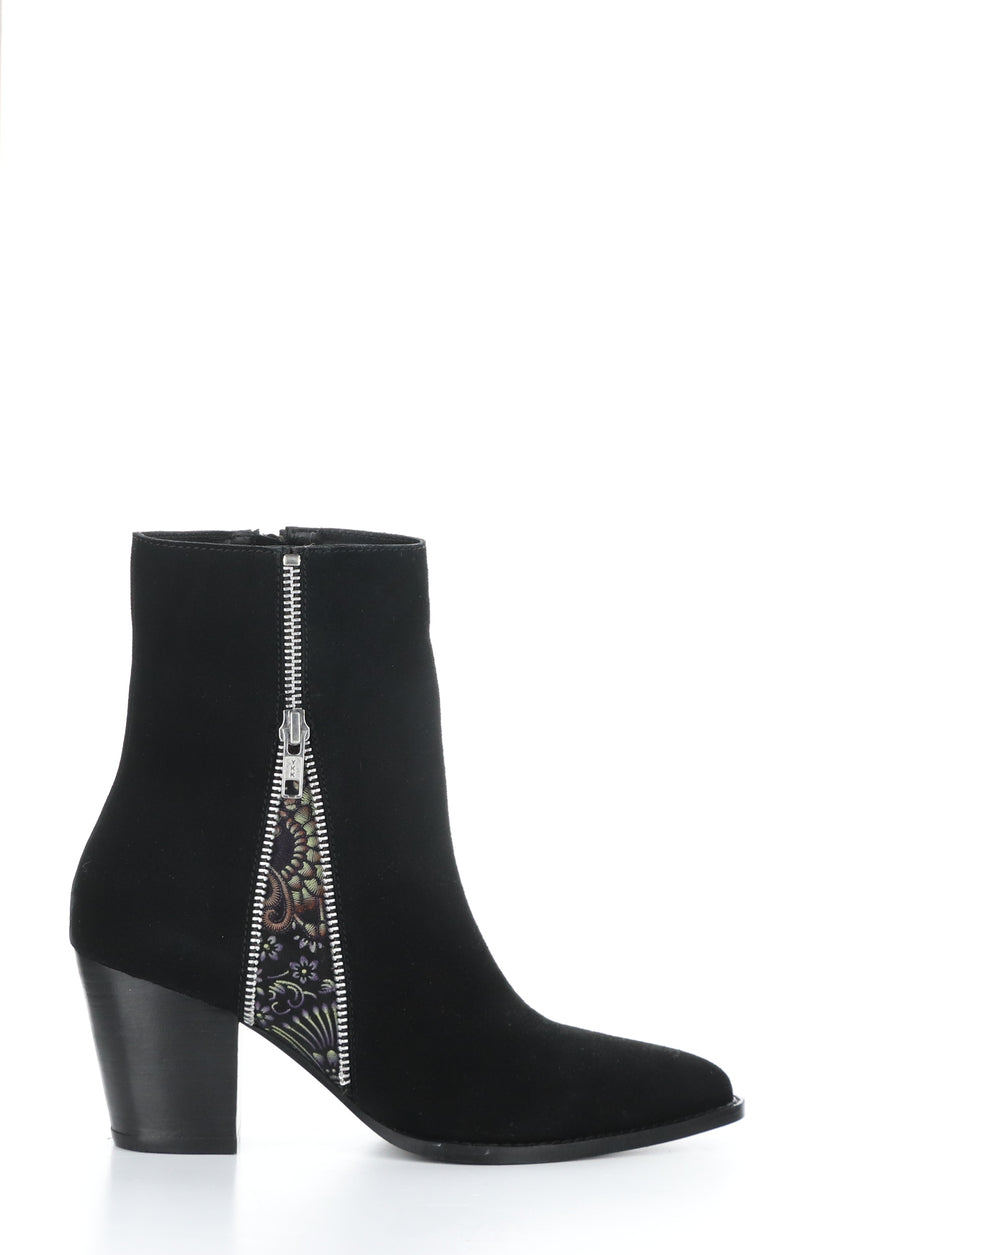 TALLON BLACK Pointed Toe Boots